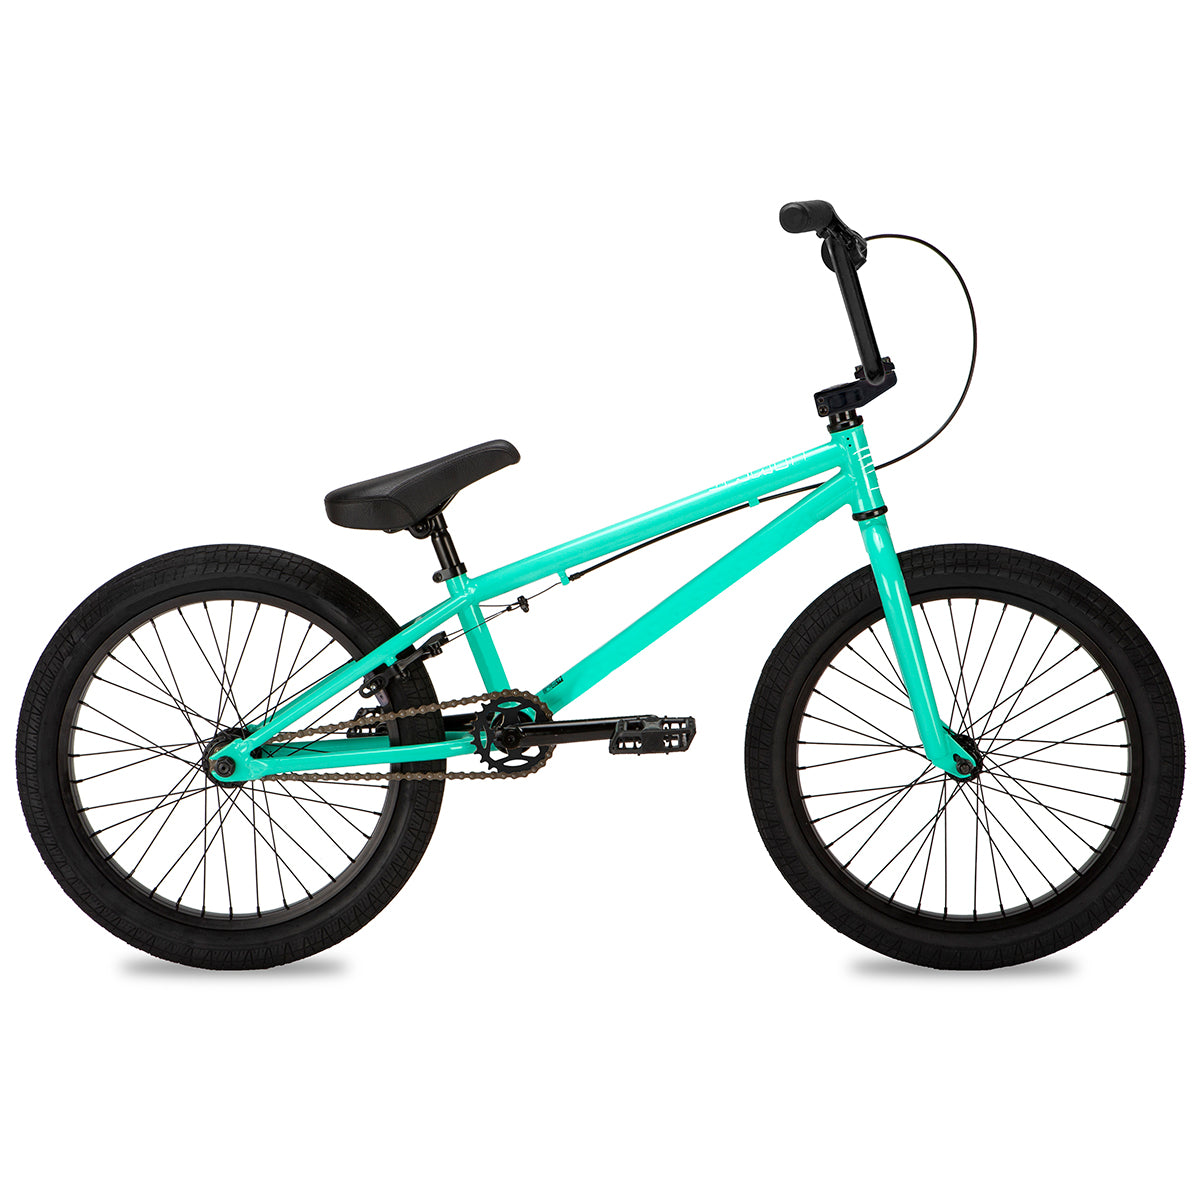 All-Rounder Freestyle BMX Bike Teal